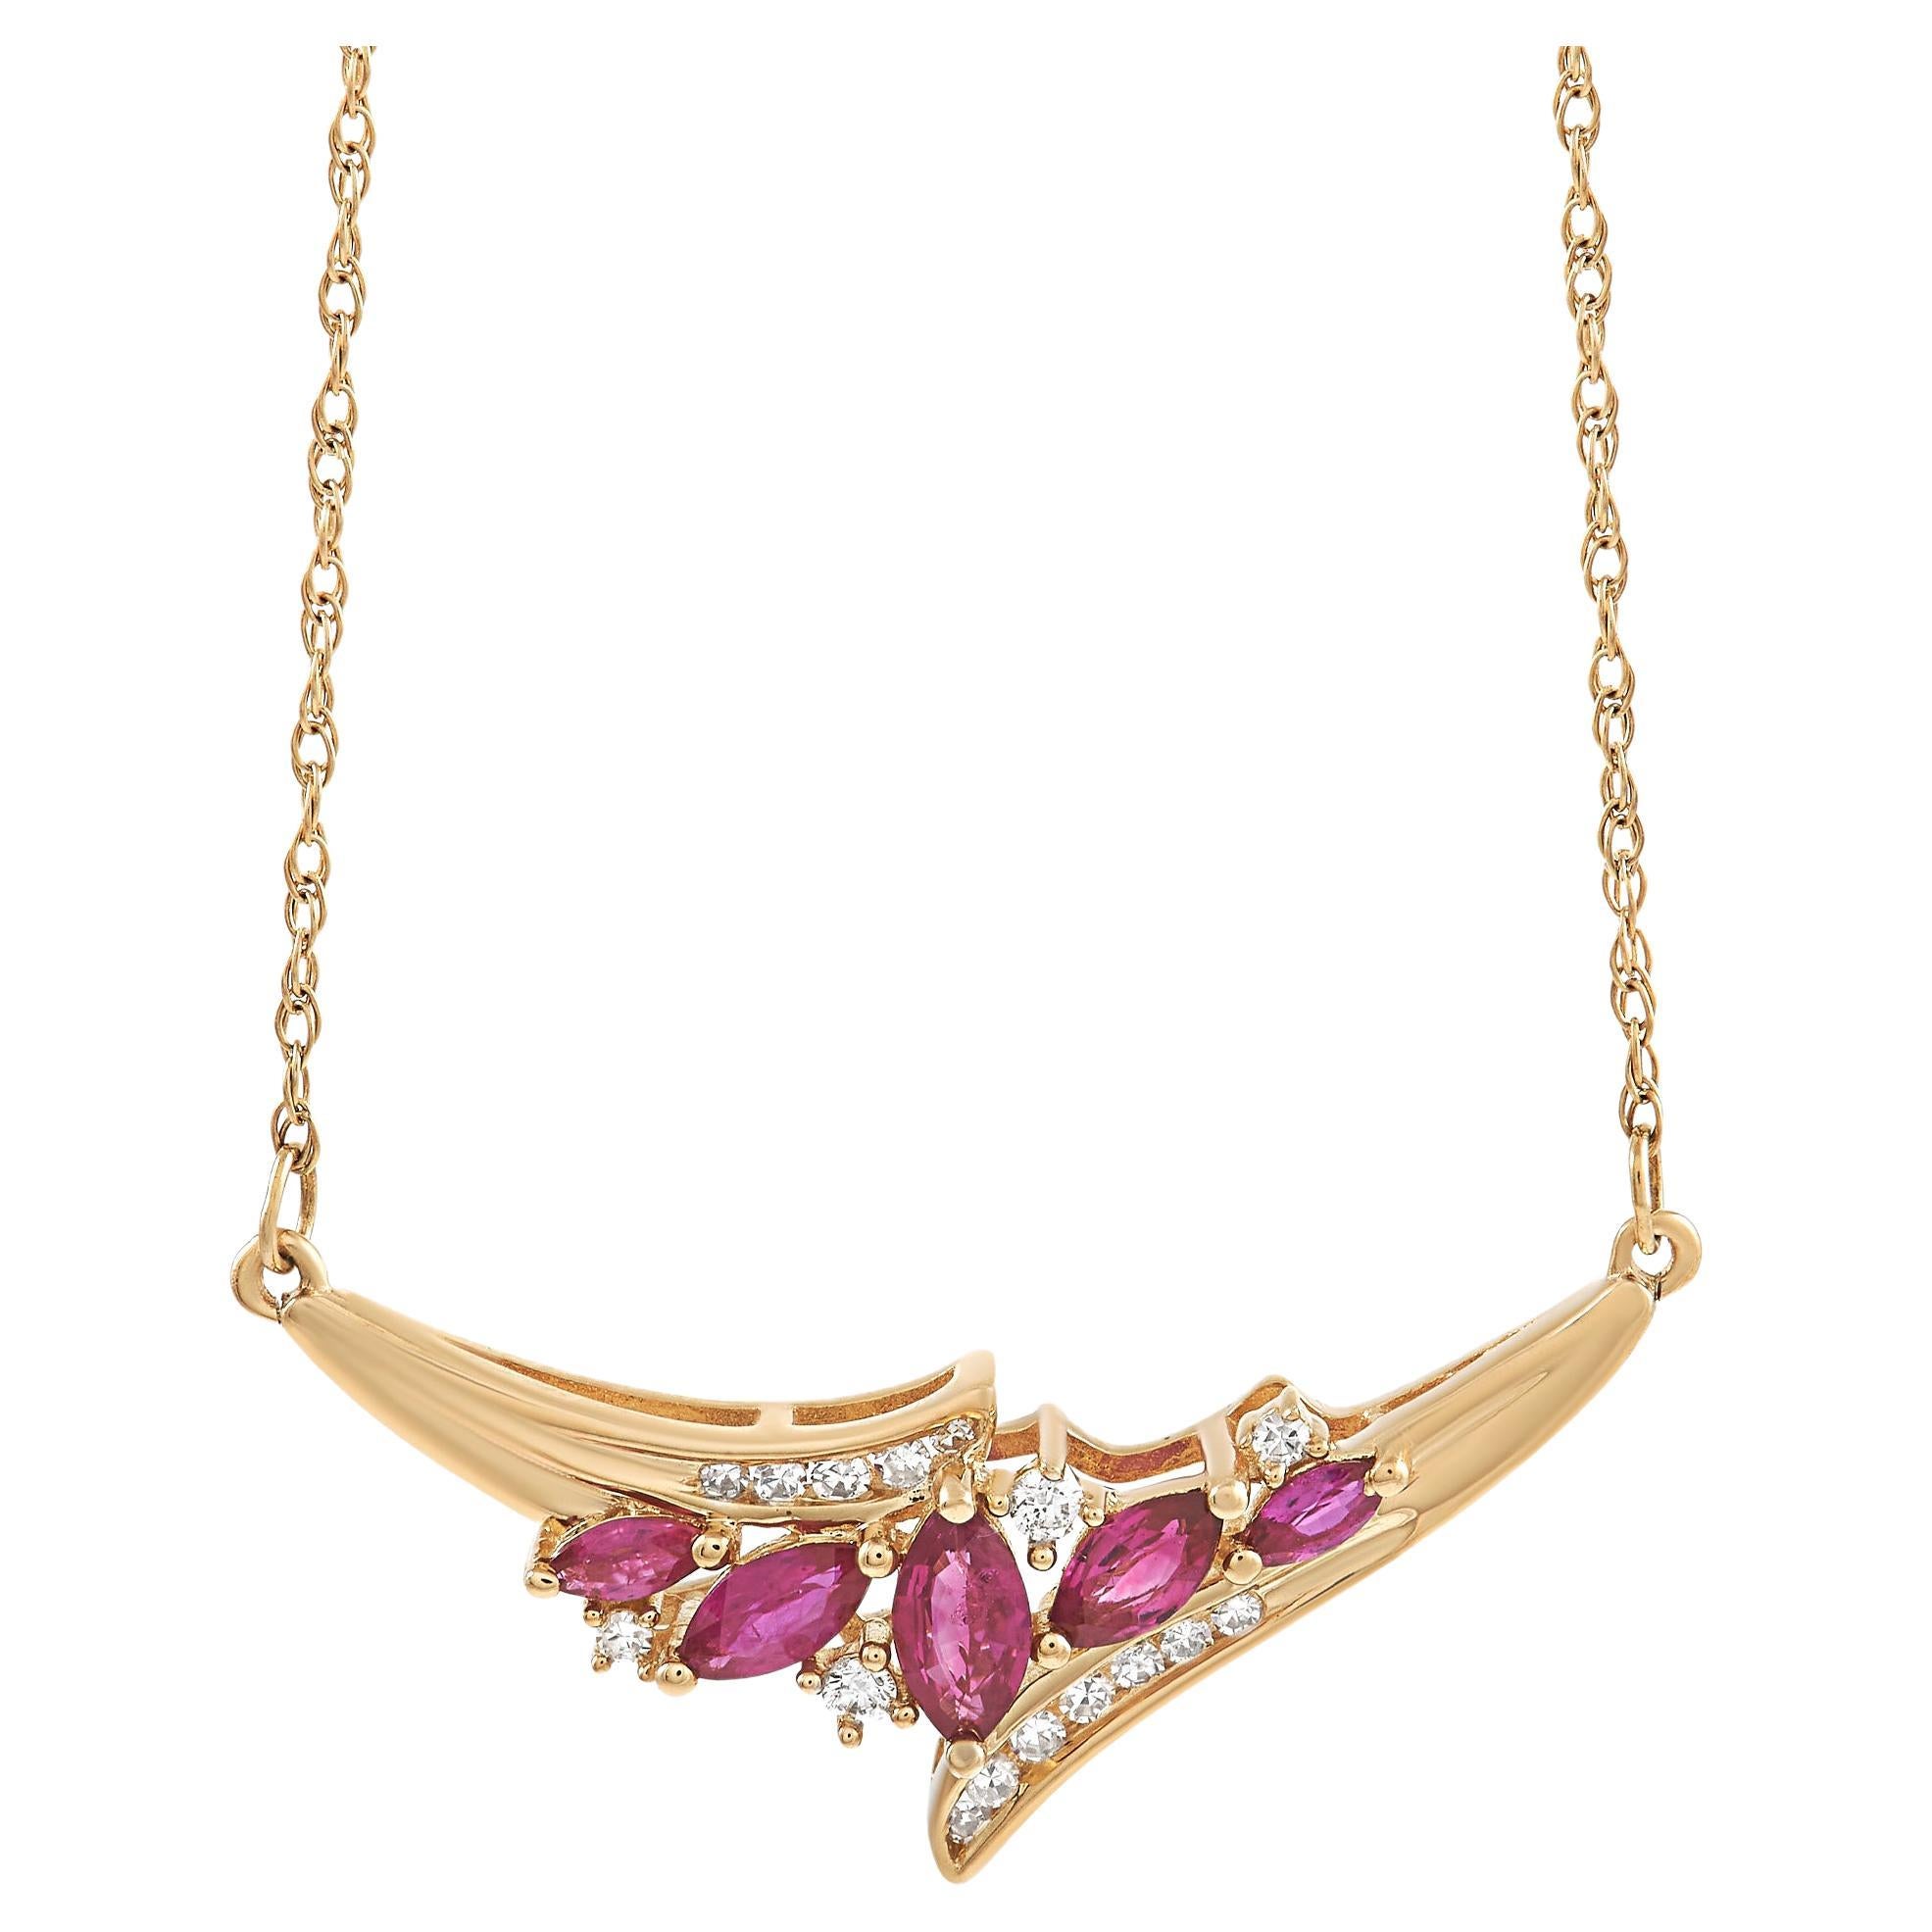 LB Exclusive 14K Yellow Gold 0.14 Ct Diamond and Ruby Necklace